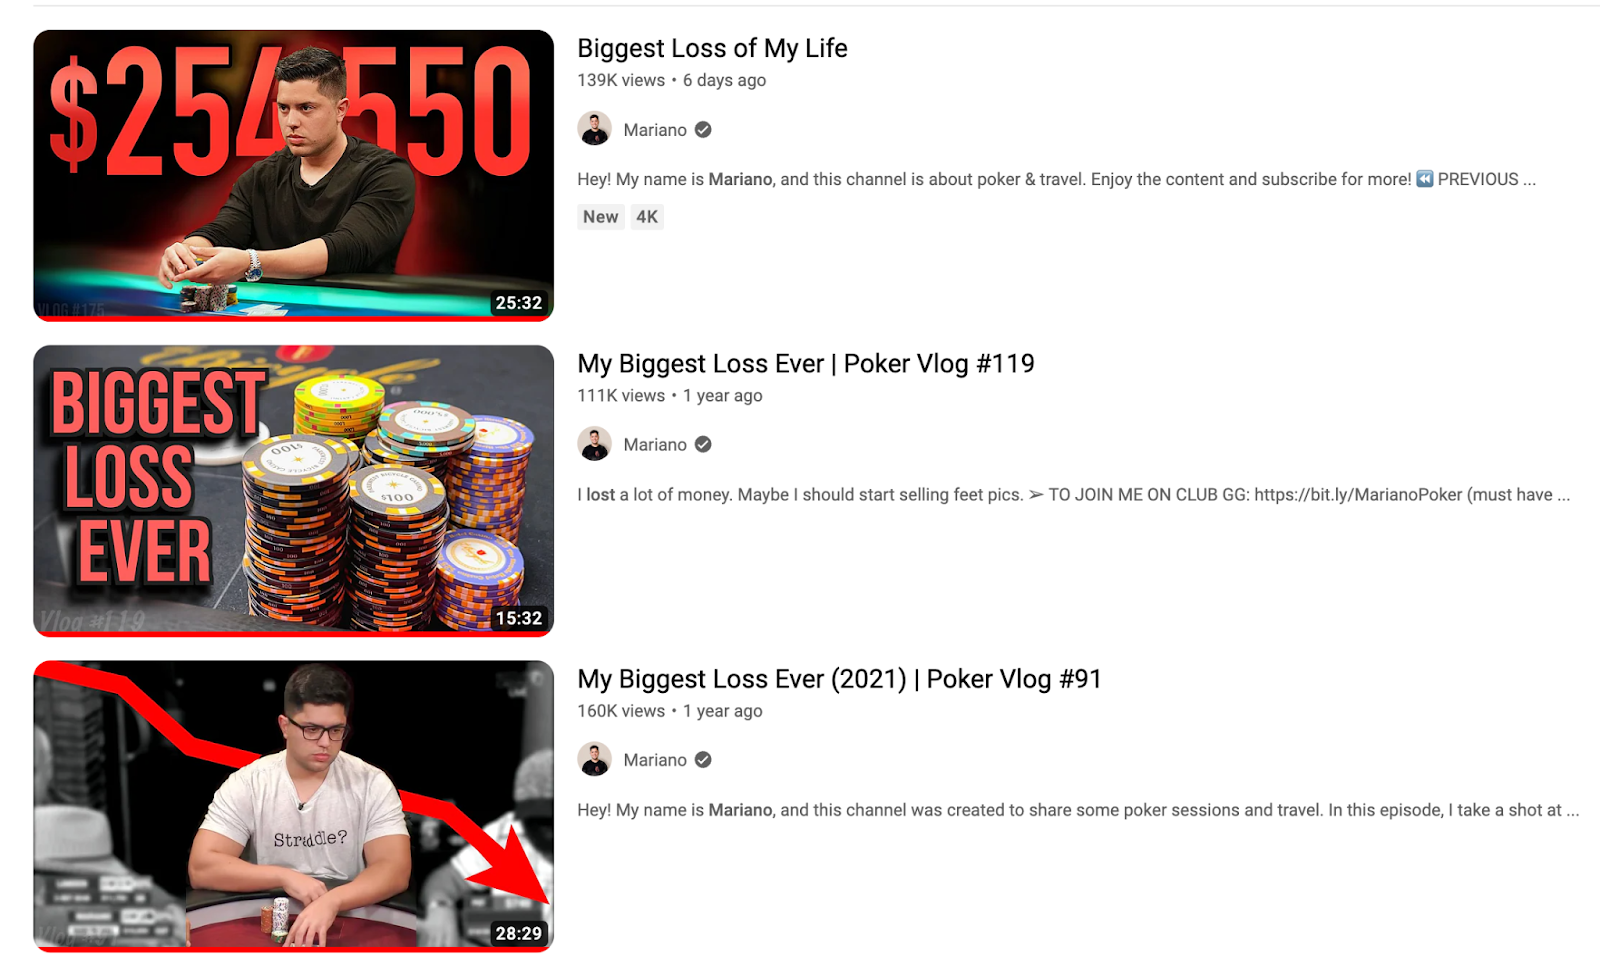 Even a successful cash game poker vlogger like Mariano Gandoli suffers major bankroll losses when he moves up to higher stakes.